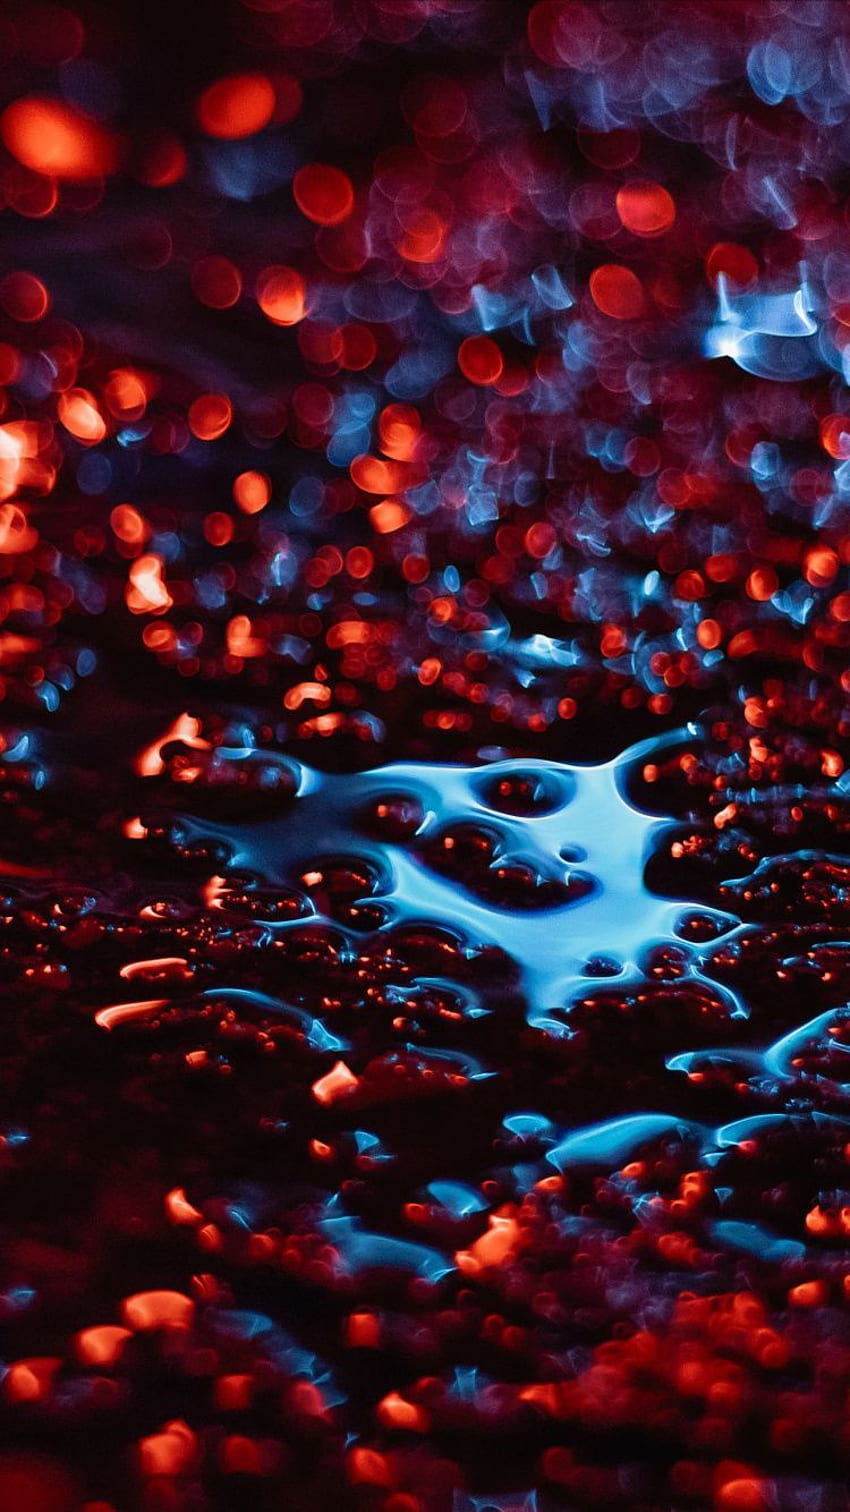 A close up of water droplets on the ground - Blood